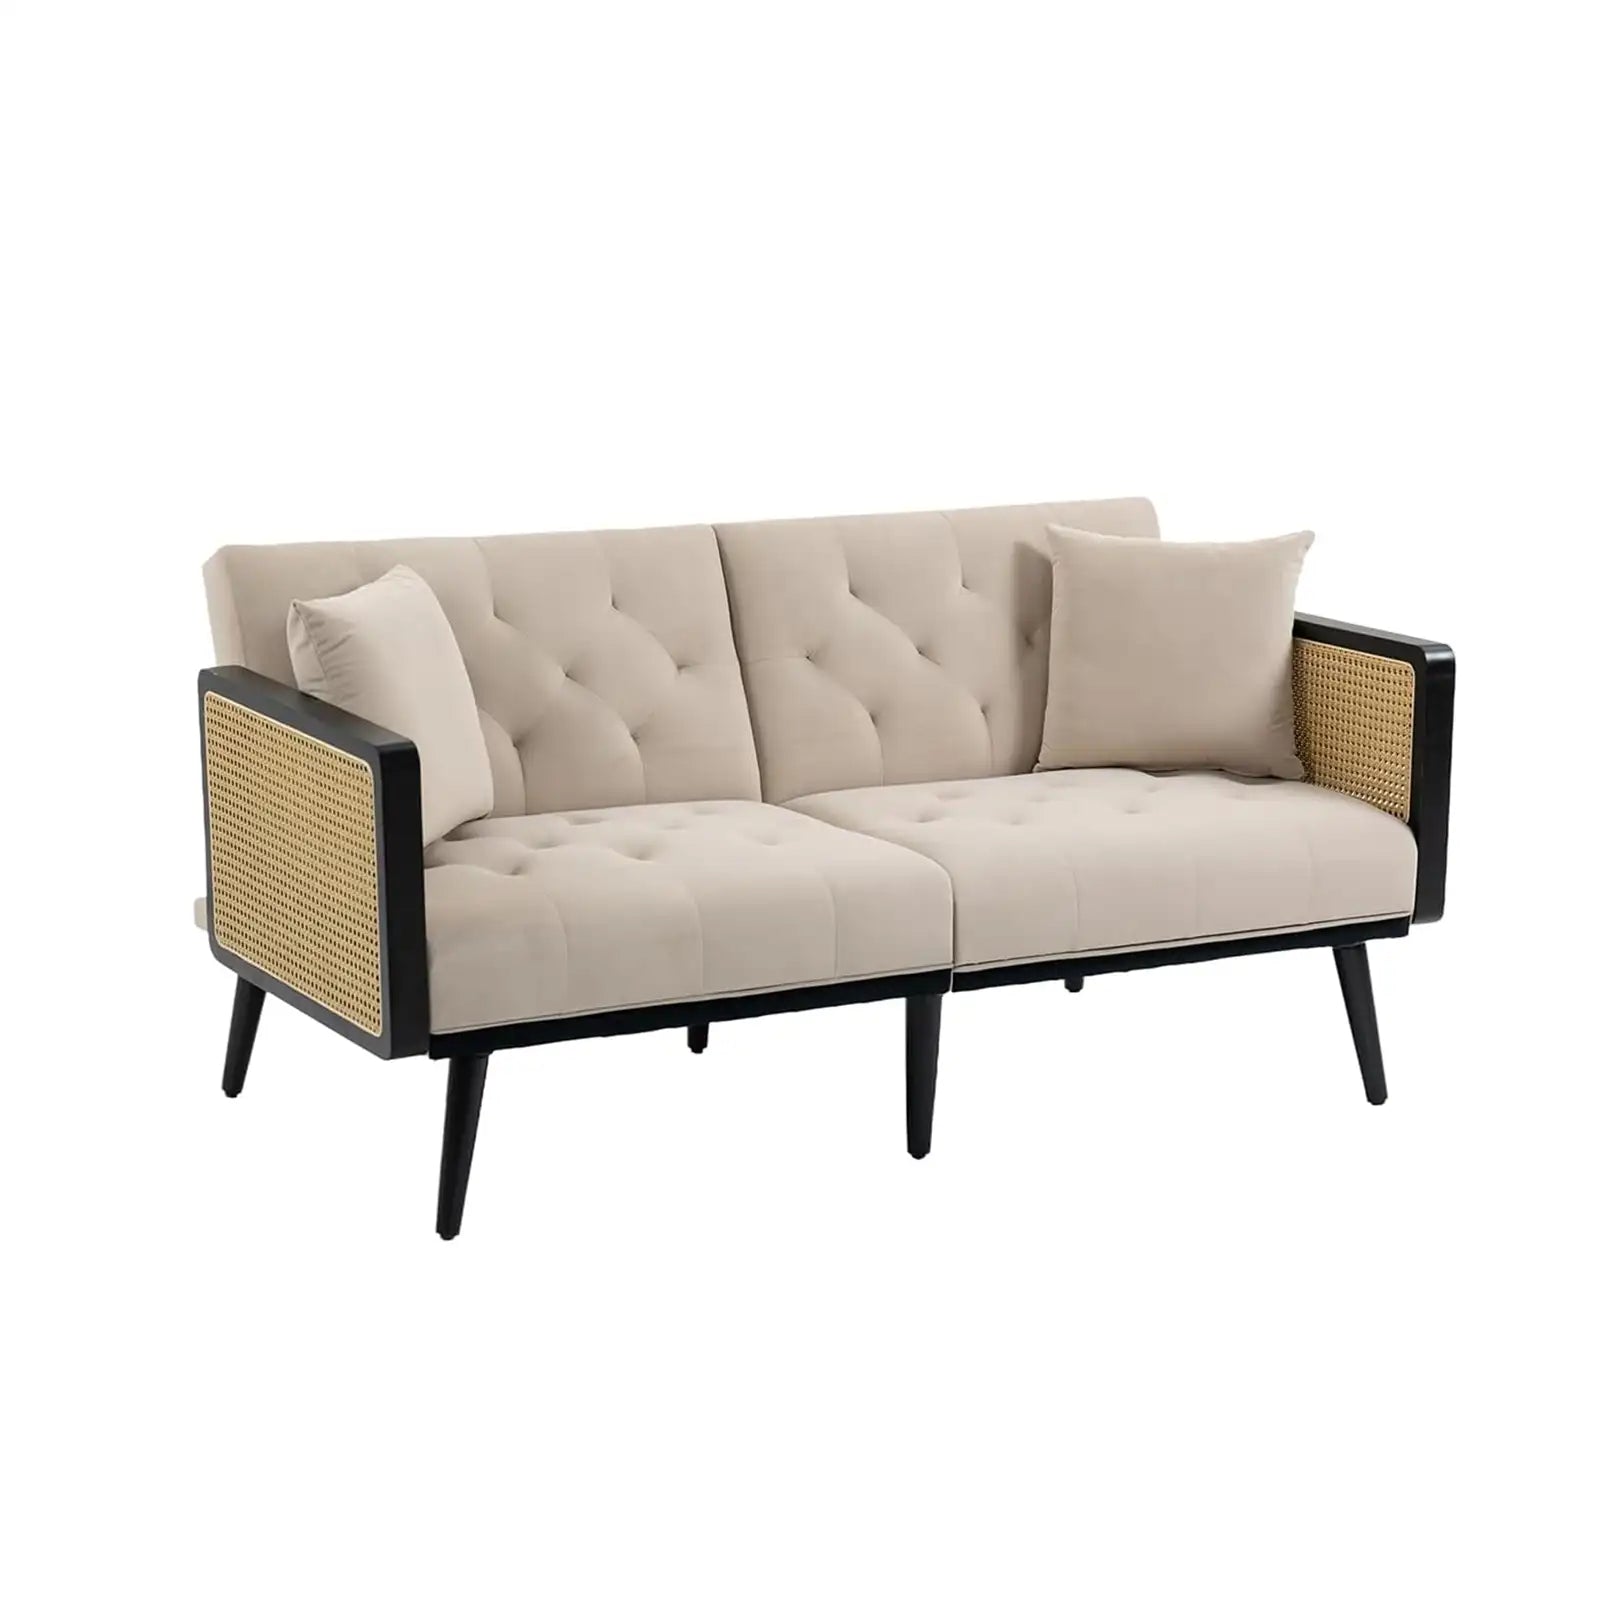 Rattan Tufted Couch, Modern Linen Sleeper Sofa, Large Comfy Upholstered Loveseat